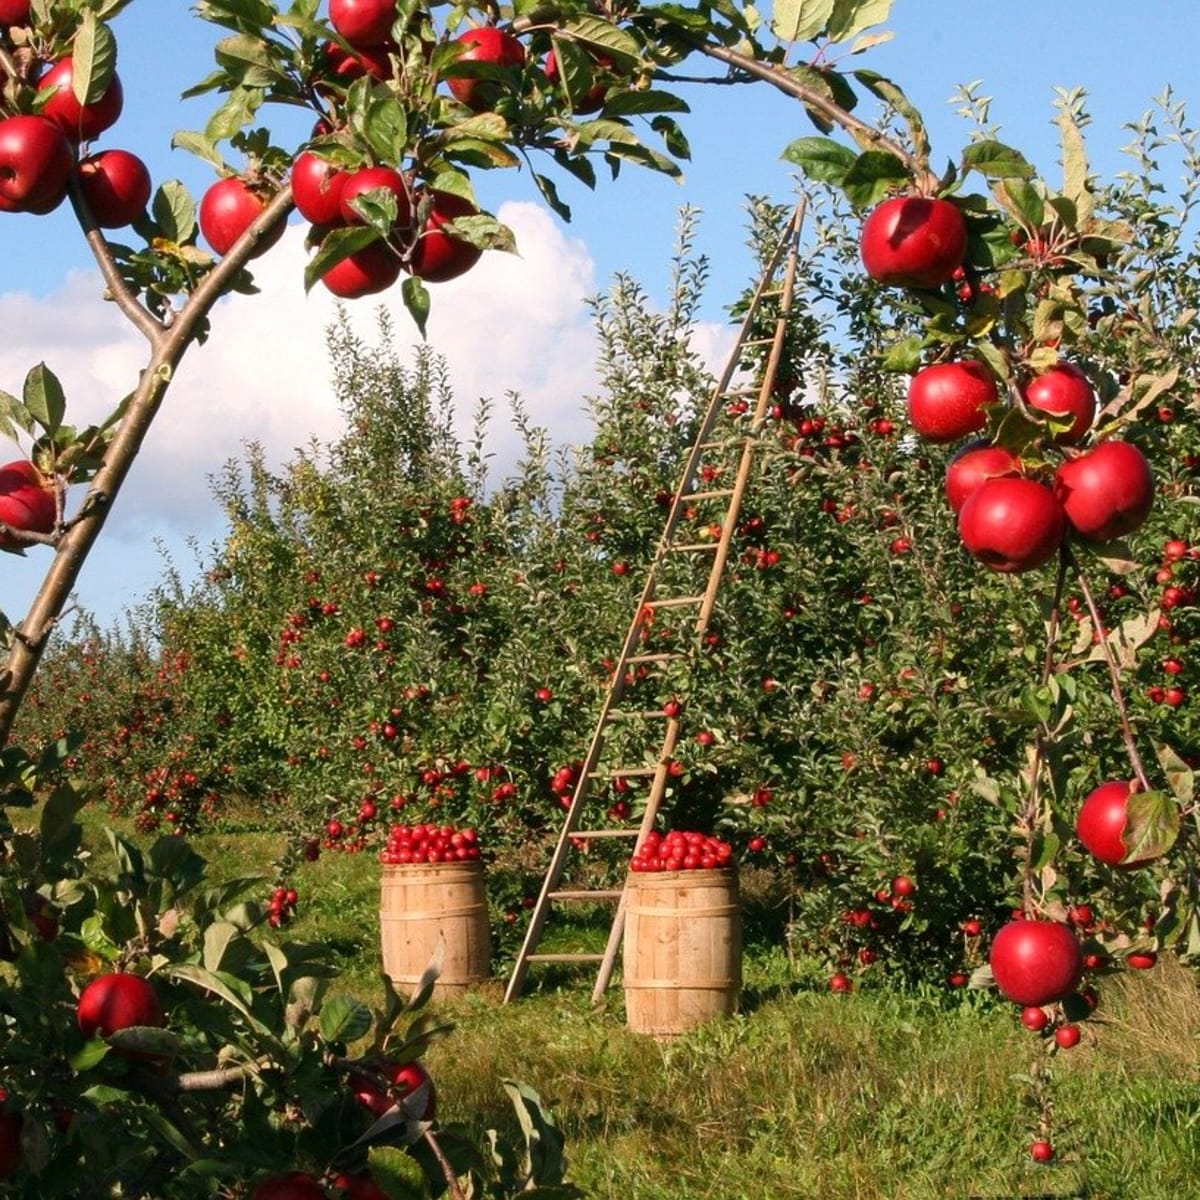 Organic Apple Orchards - Forks in the Dirt Finding your fall family outing